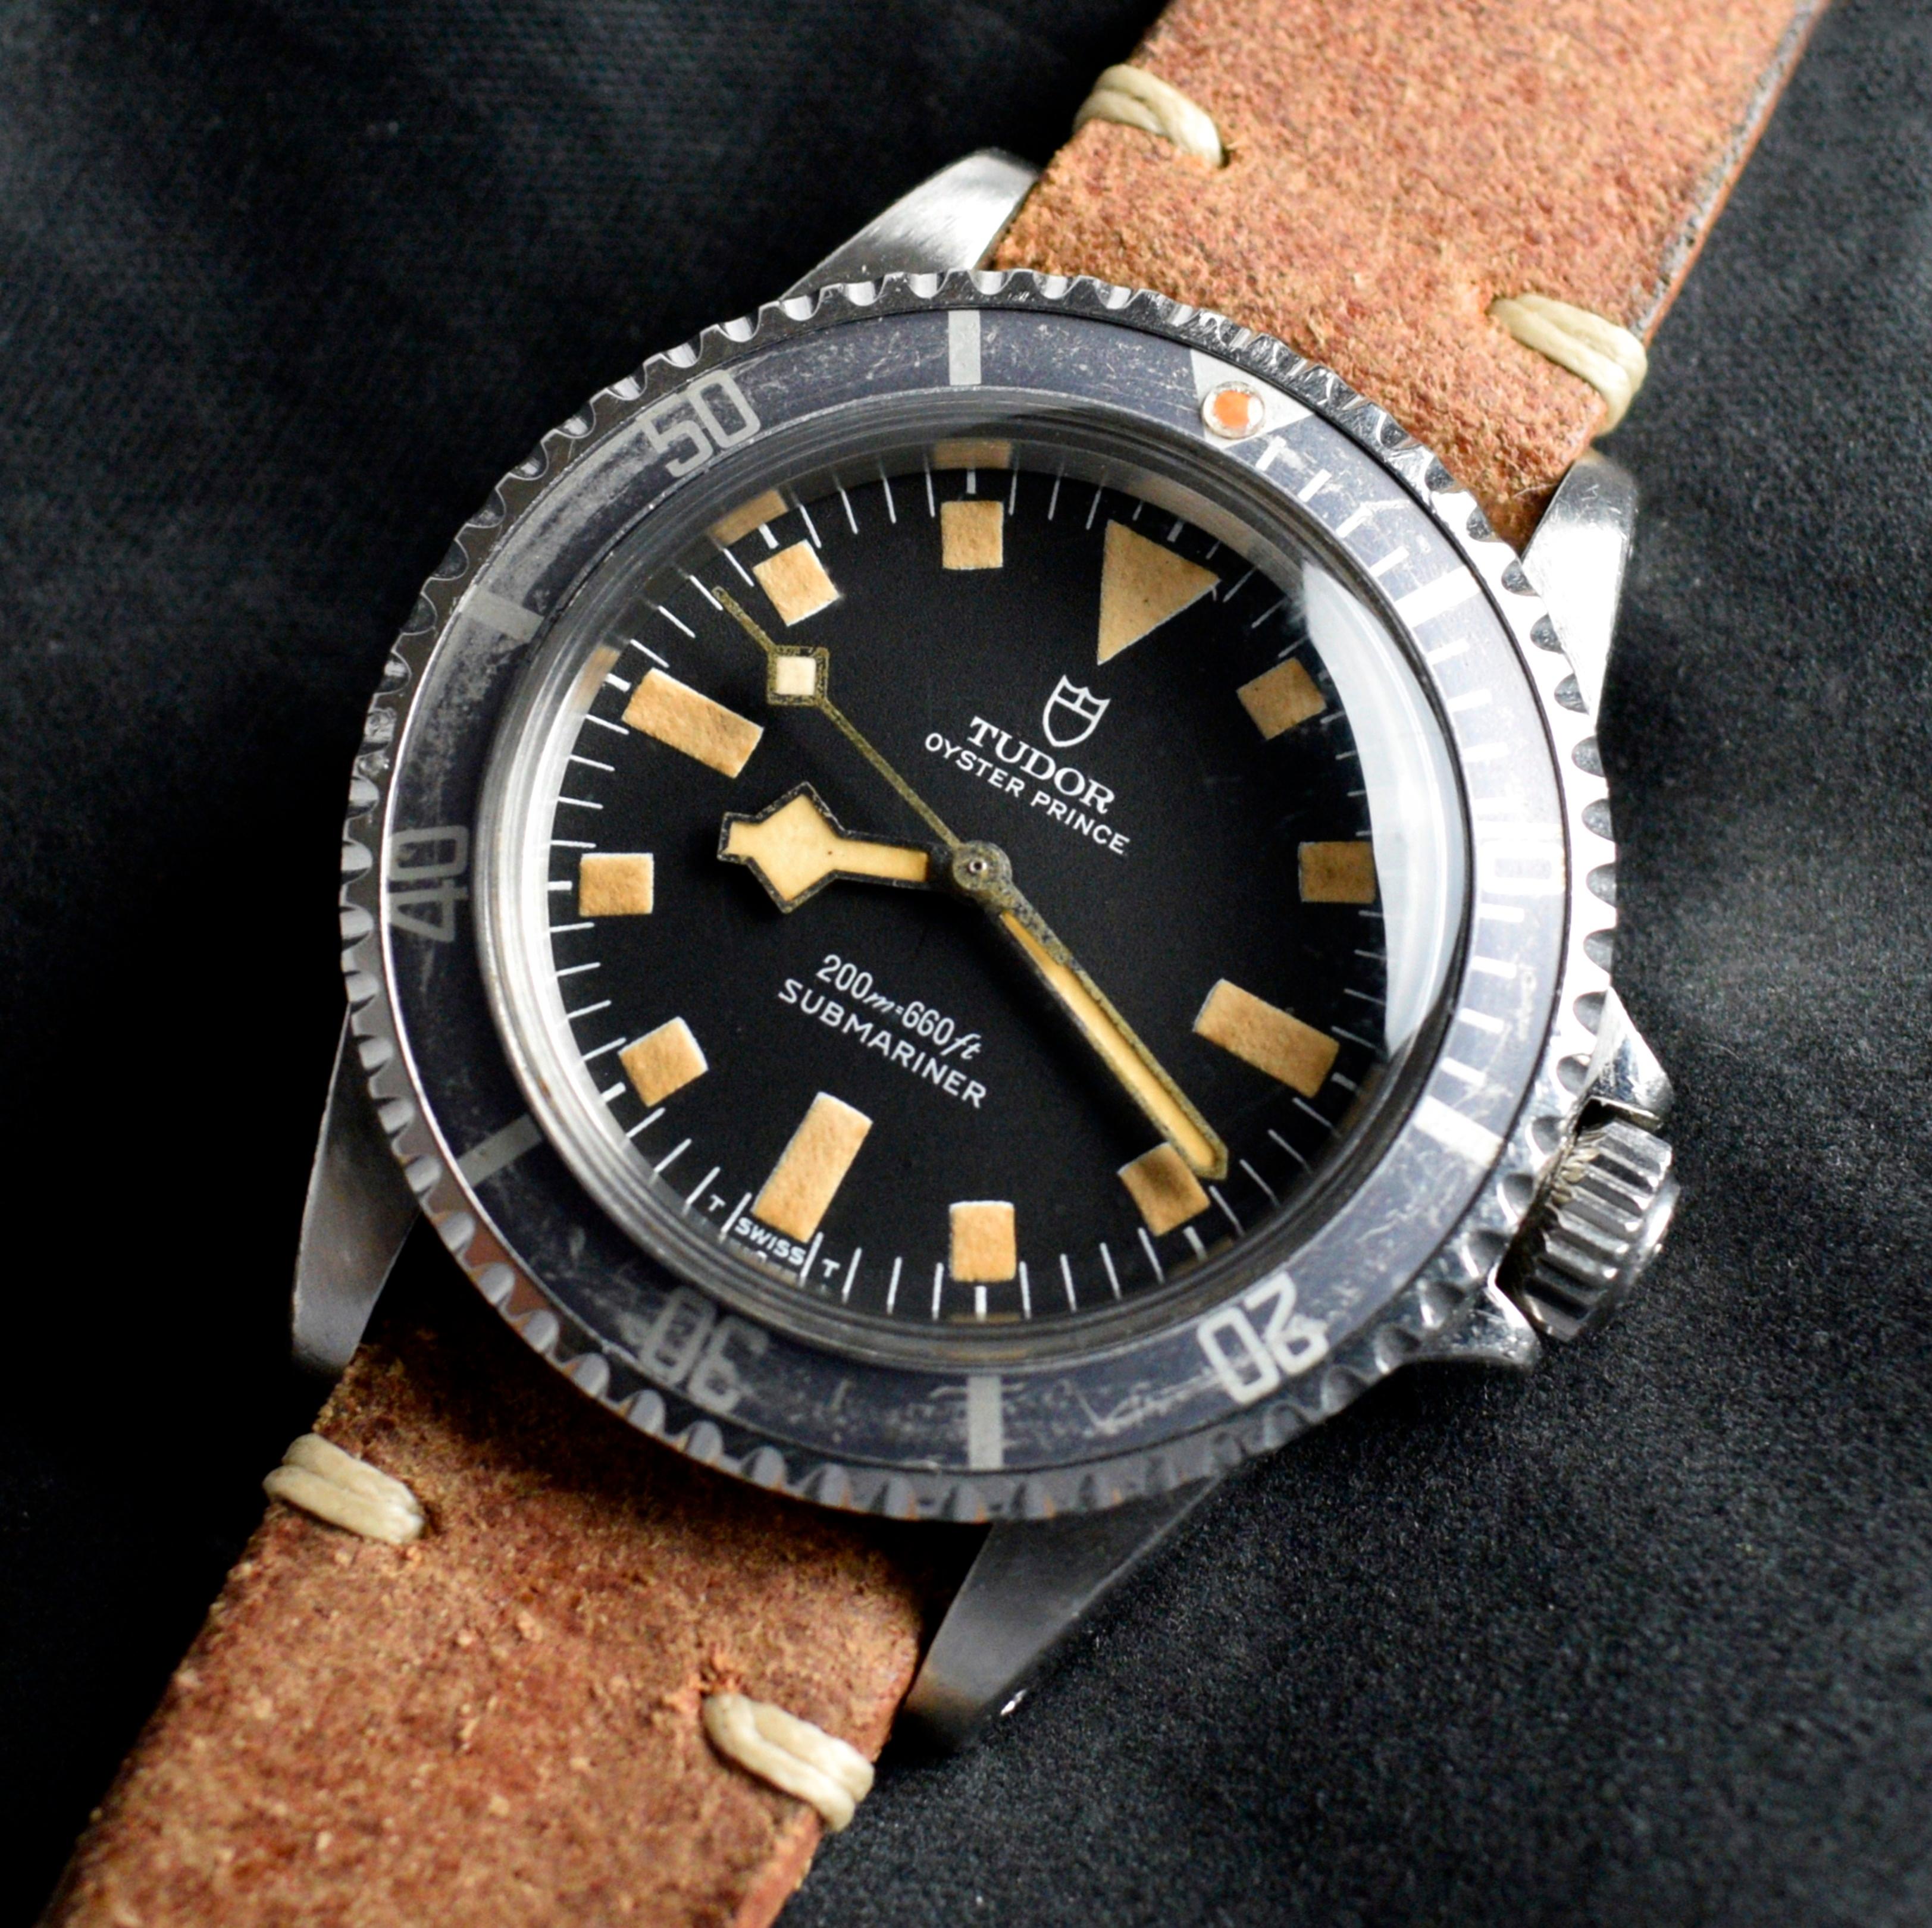 Brand: Vintage Tudor
Model: 9401/0
Year: 1980
Serial number: 94xxxx
Reference: OT1572
Case: Show heavy sign of wear with slight polish from previous
Dial: Excellent Aged Condition Black Tritium Snowflake Dial where the lumes have turned into warm